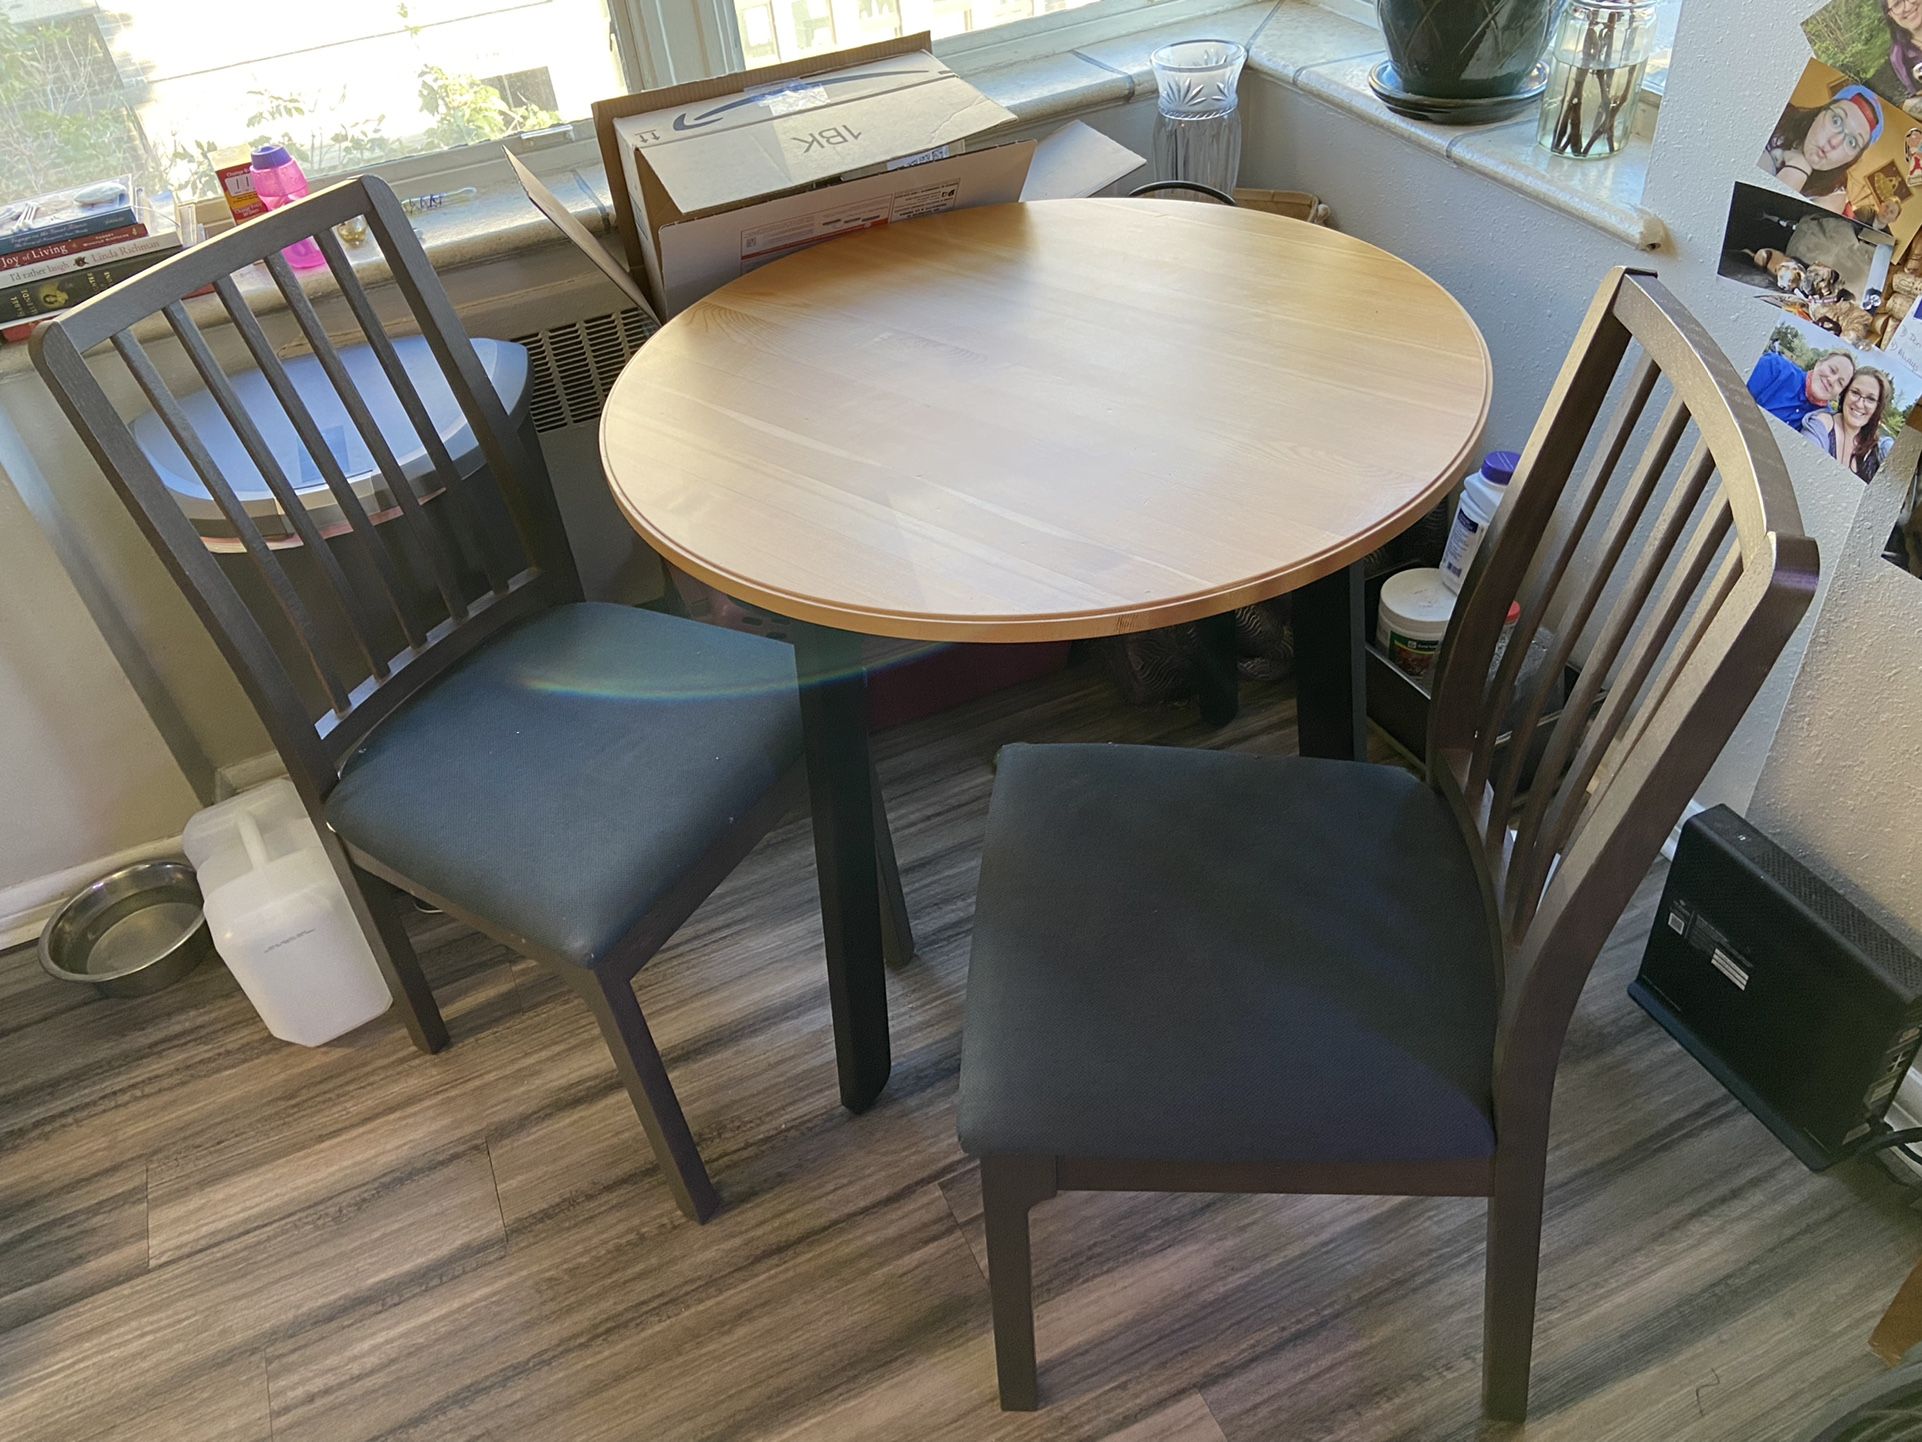 IKEA Ekedalen Kitchen Chairs And Gamlared Table 